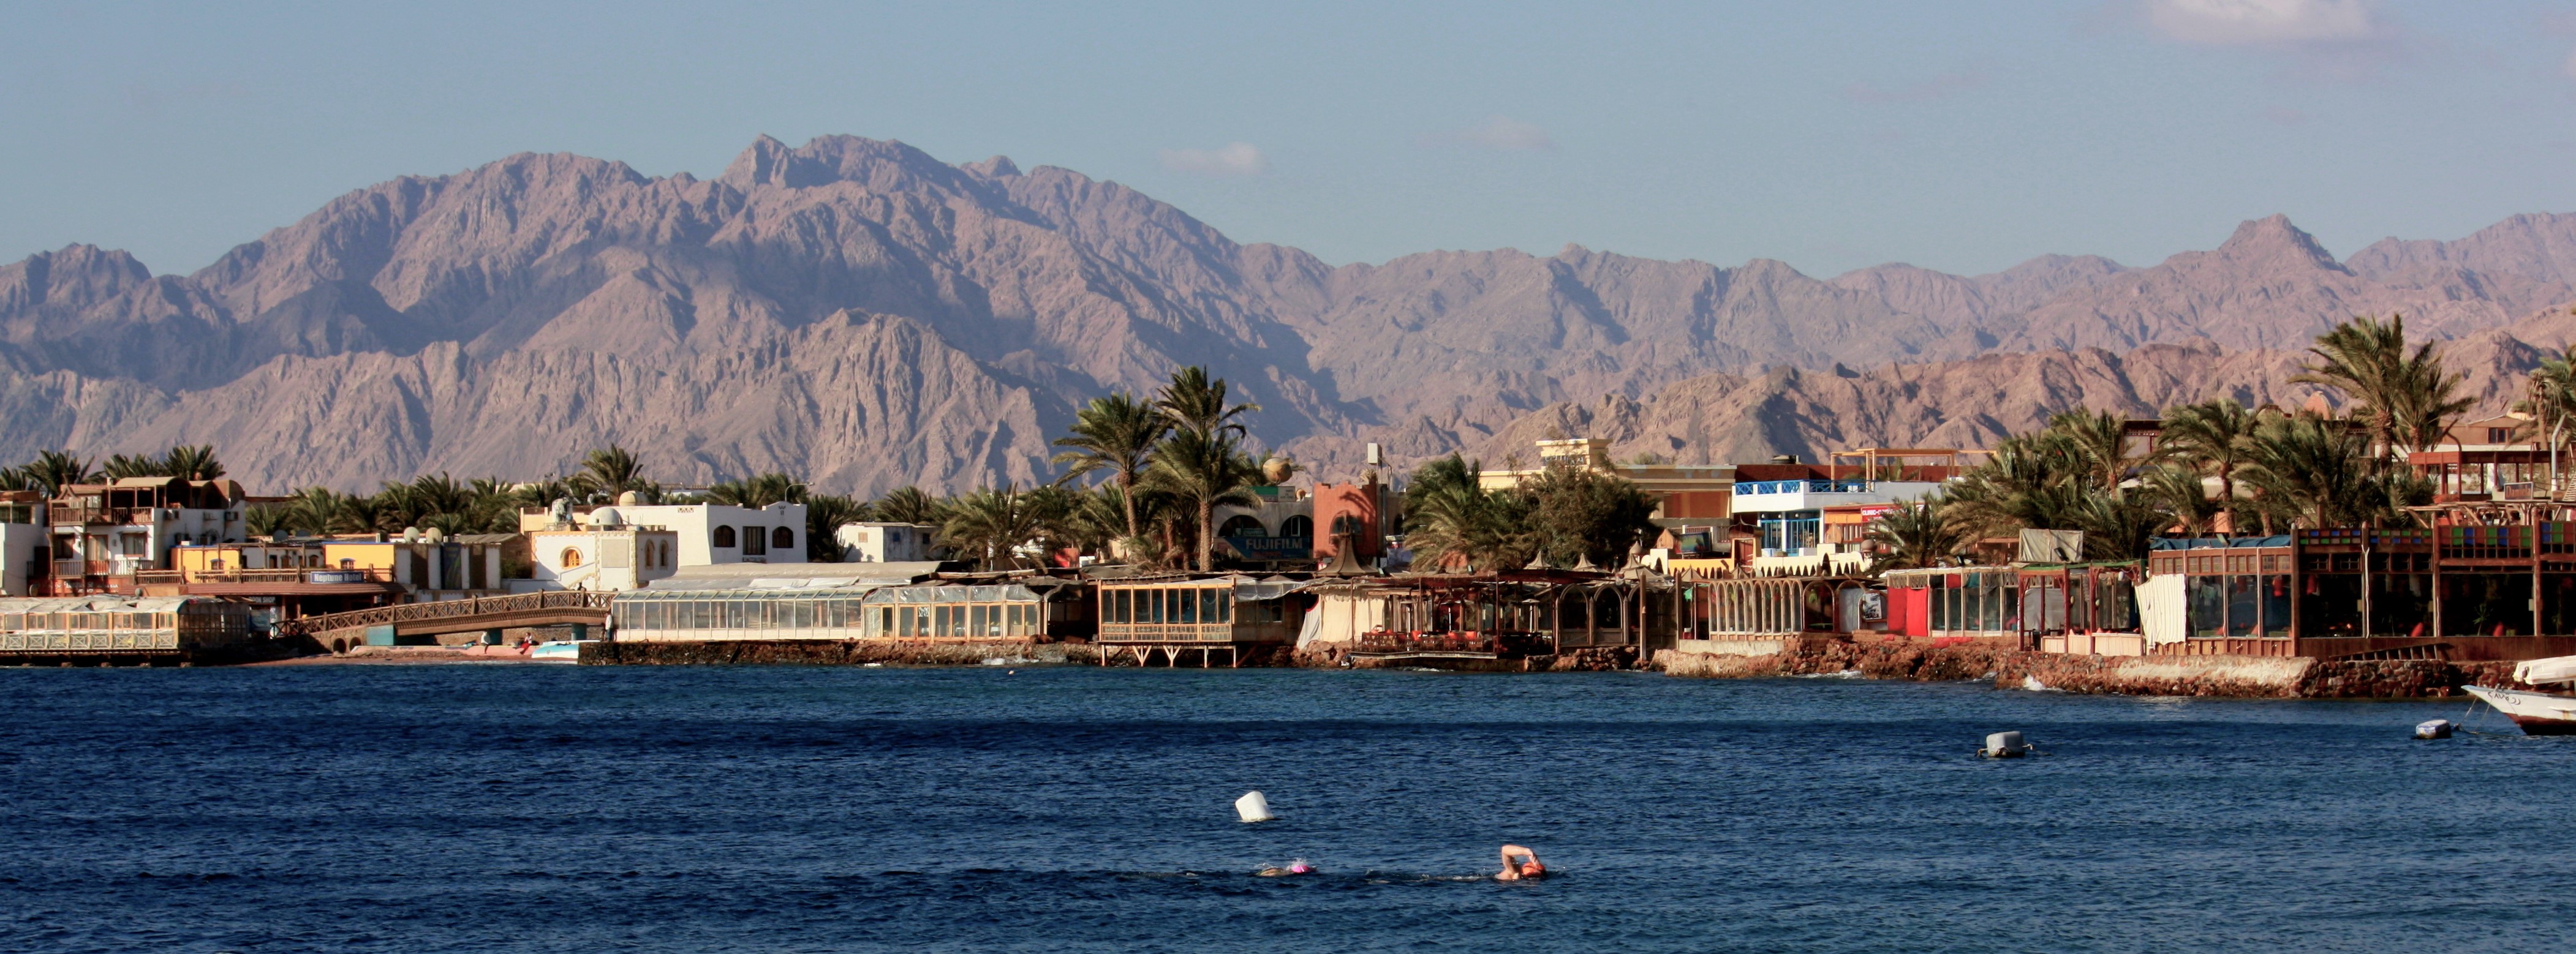 Inns and cafeterias lining the Red Sea in Dahab. Credit: Katia Vastiau